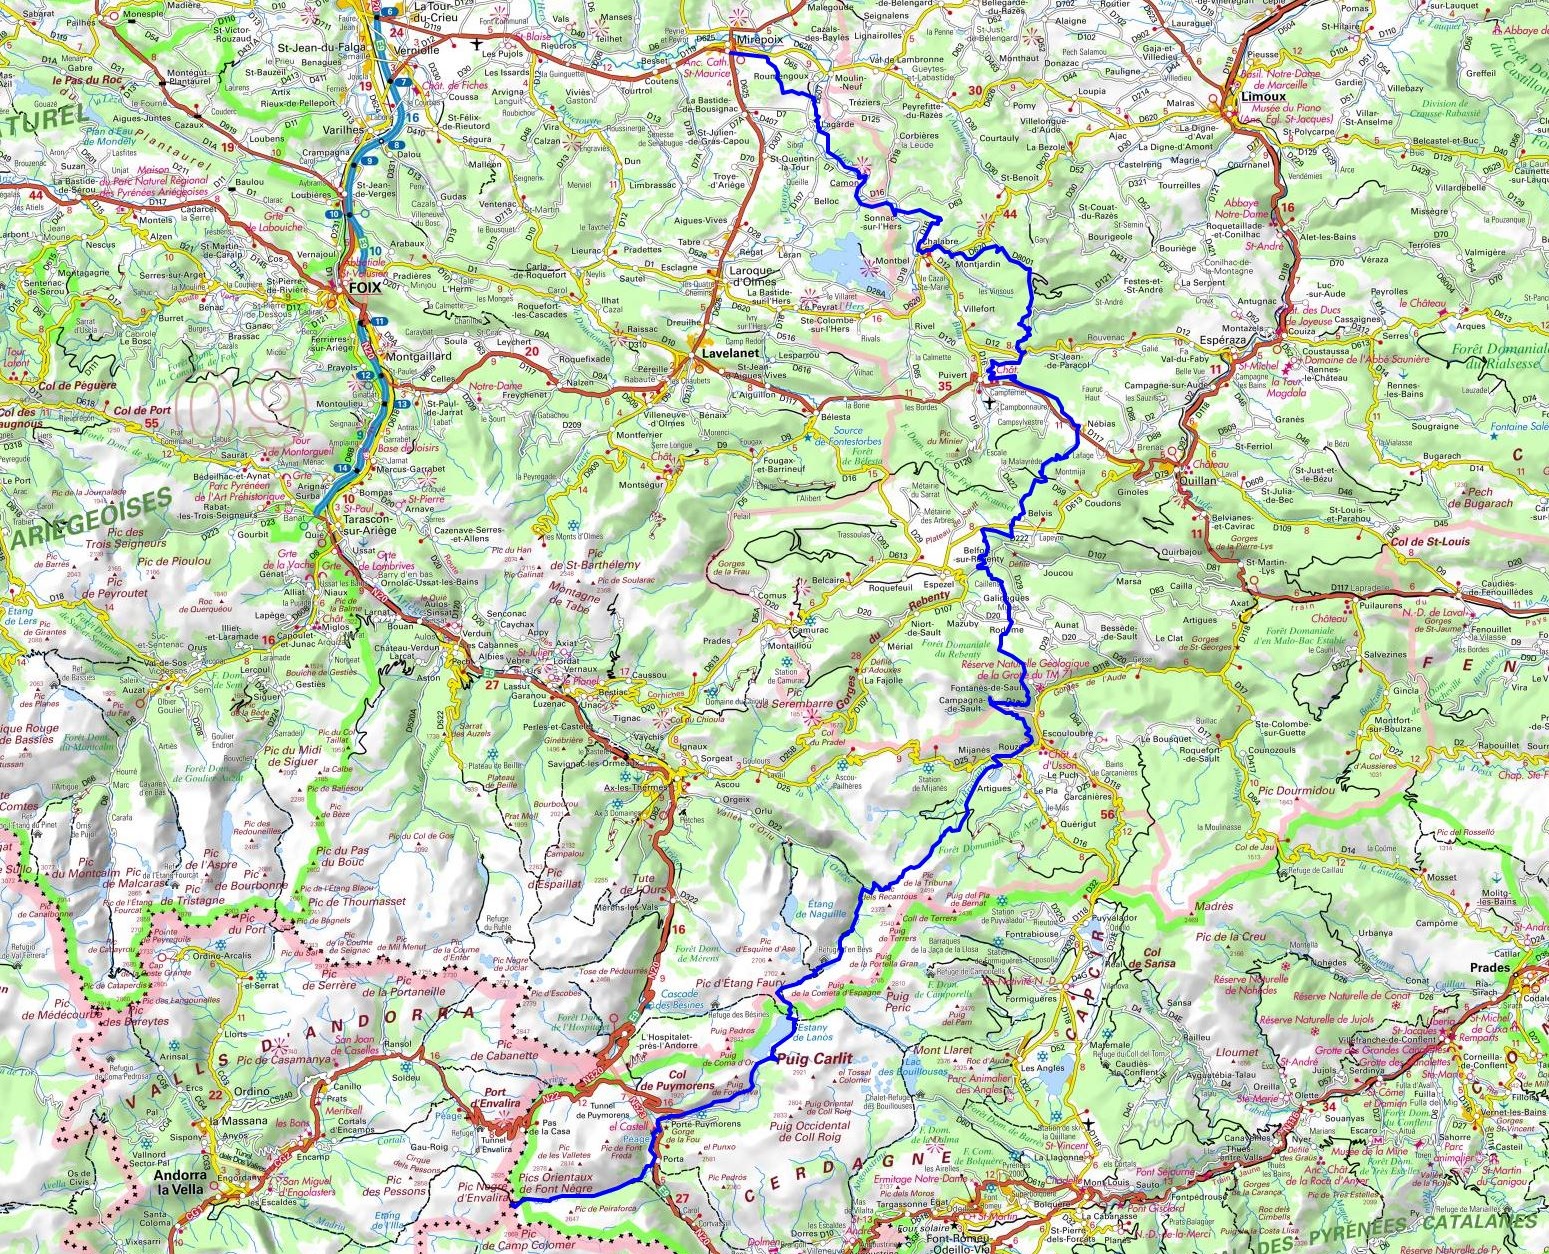 GR7 Hiking from Mirepoix (Ariege) to Portella Blanca of Andorra (France-Spain)